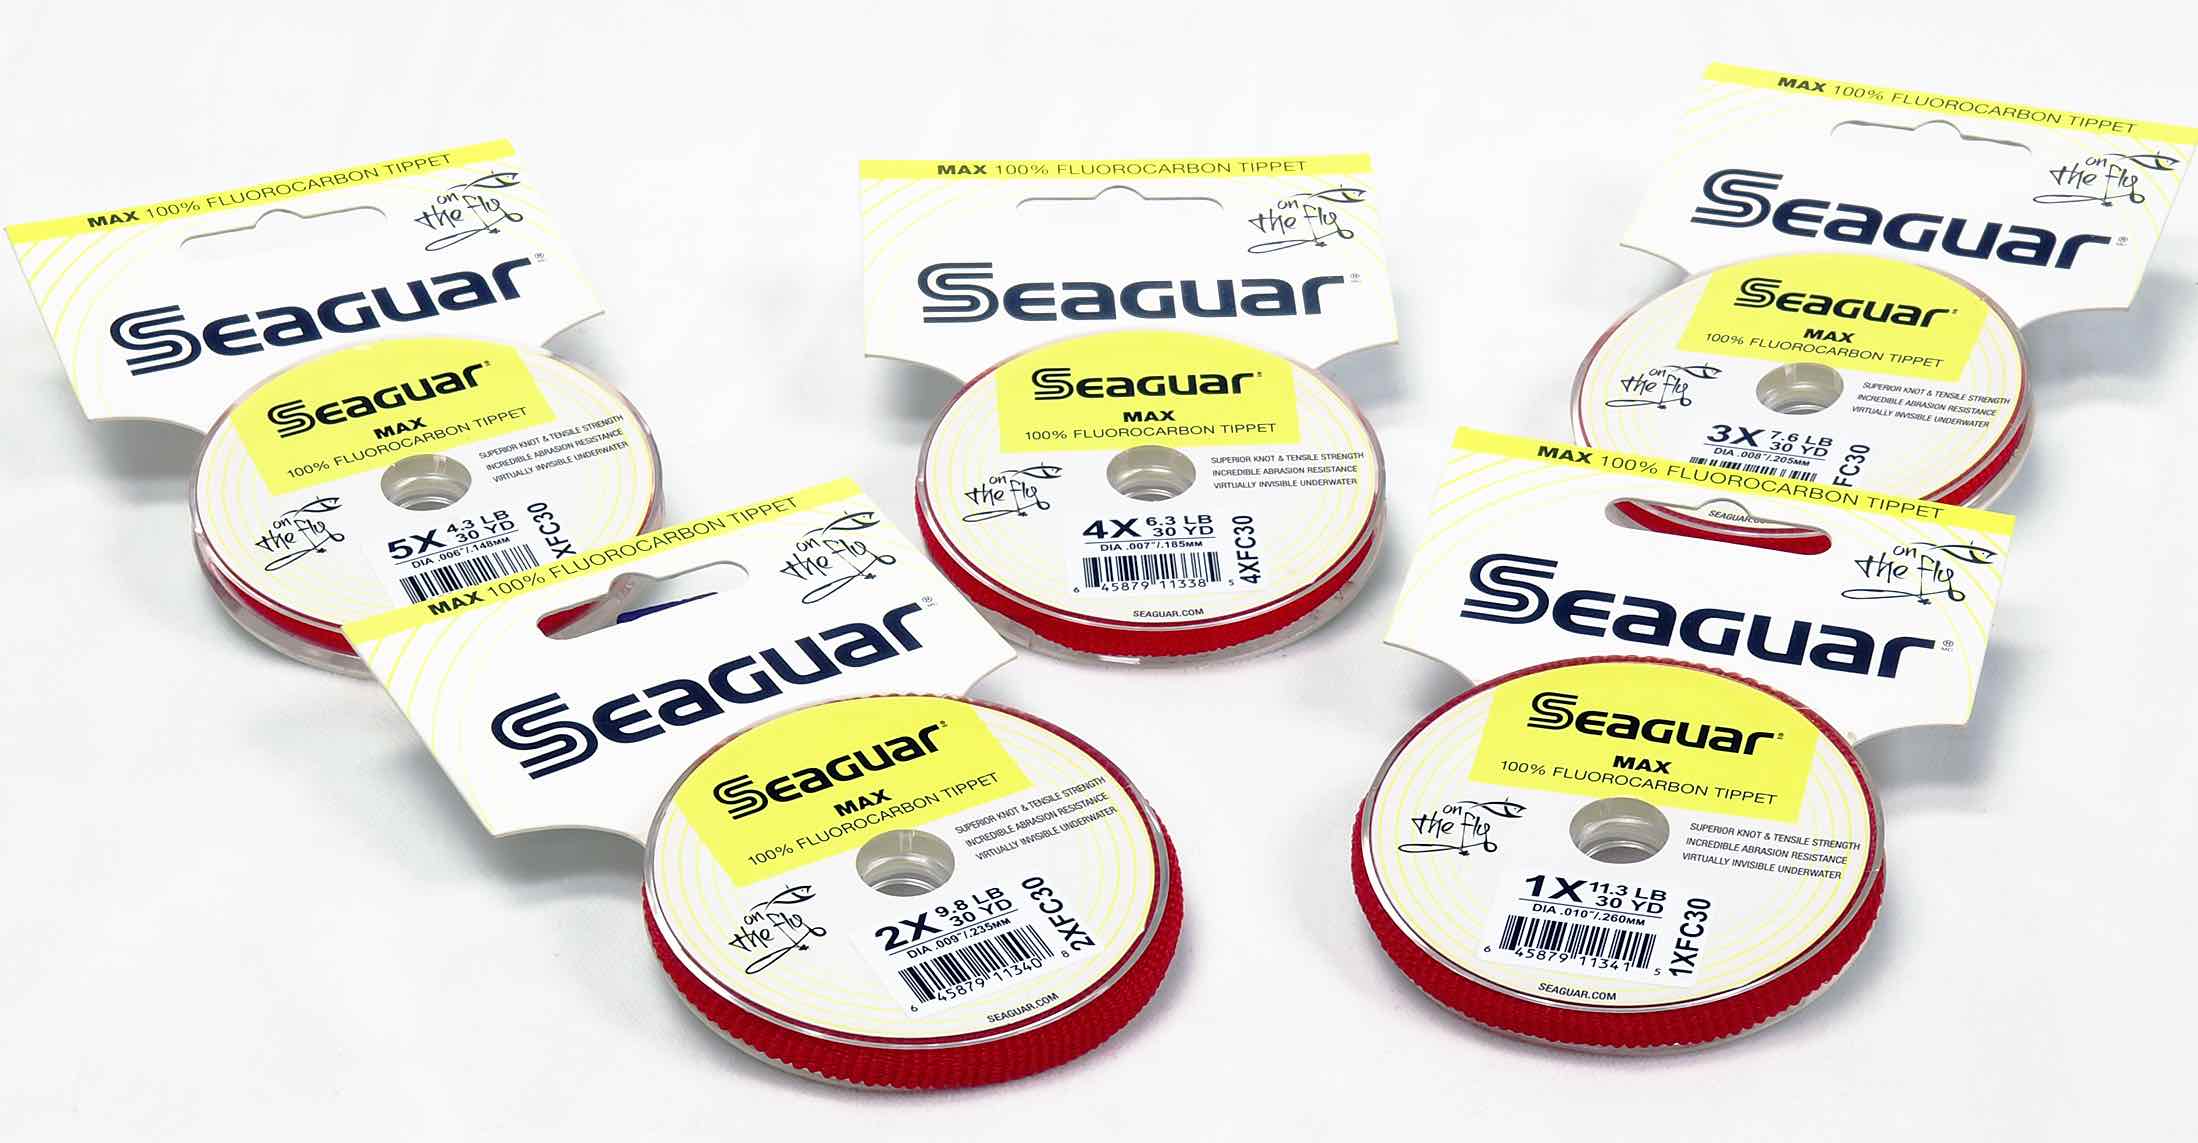 Seaguar Grand Max Tippet Material - 100% Fluorocarbon